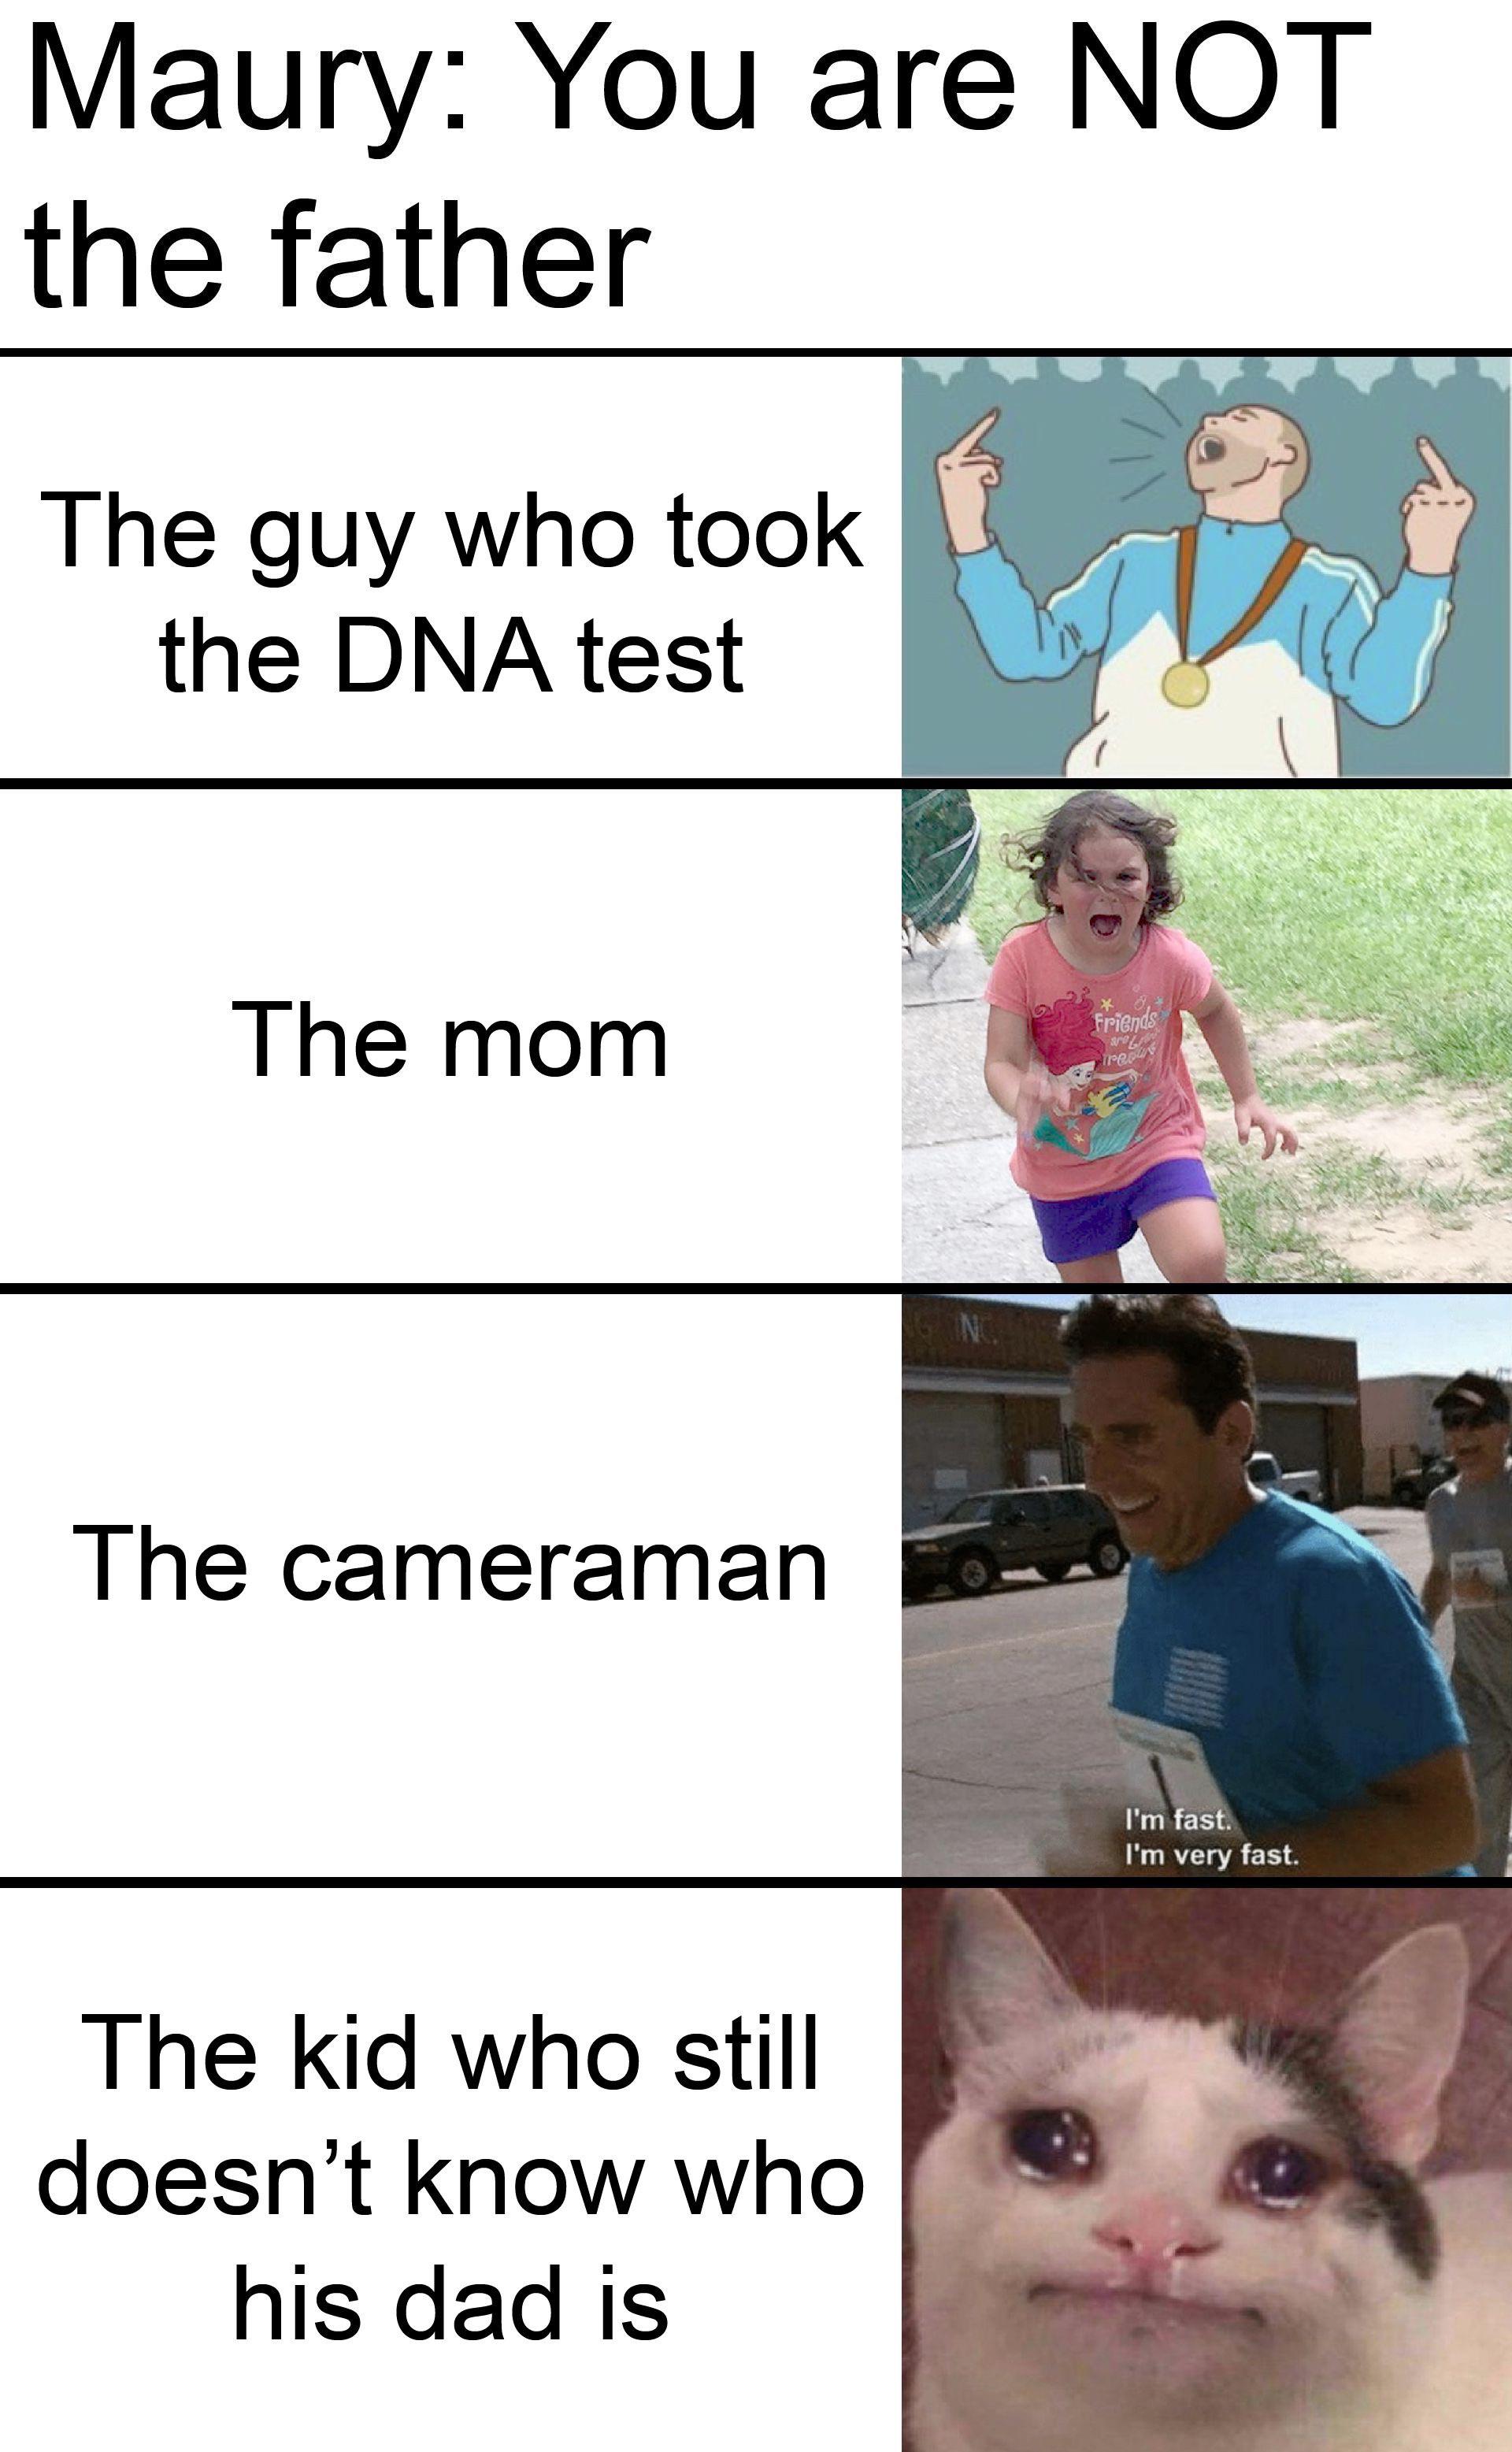 funny memes - dank memes - pet - Maury You are Not the father The guy who took the Dna test The mom Friends 2004 repu Inc The cameraman I'm fast. I'm very fast. The kid who still doesn't know who his dad is